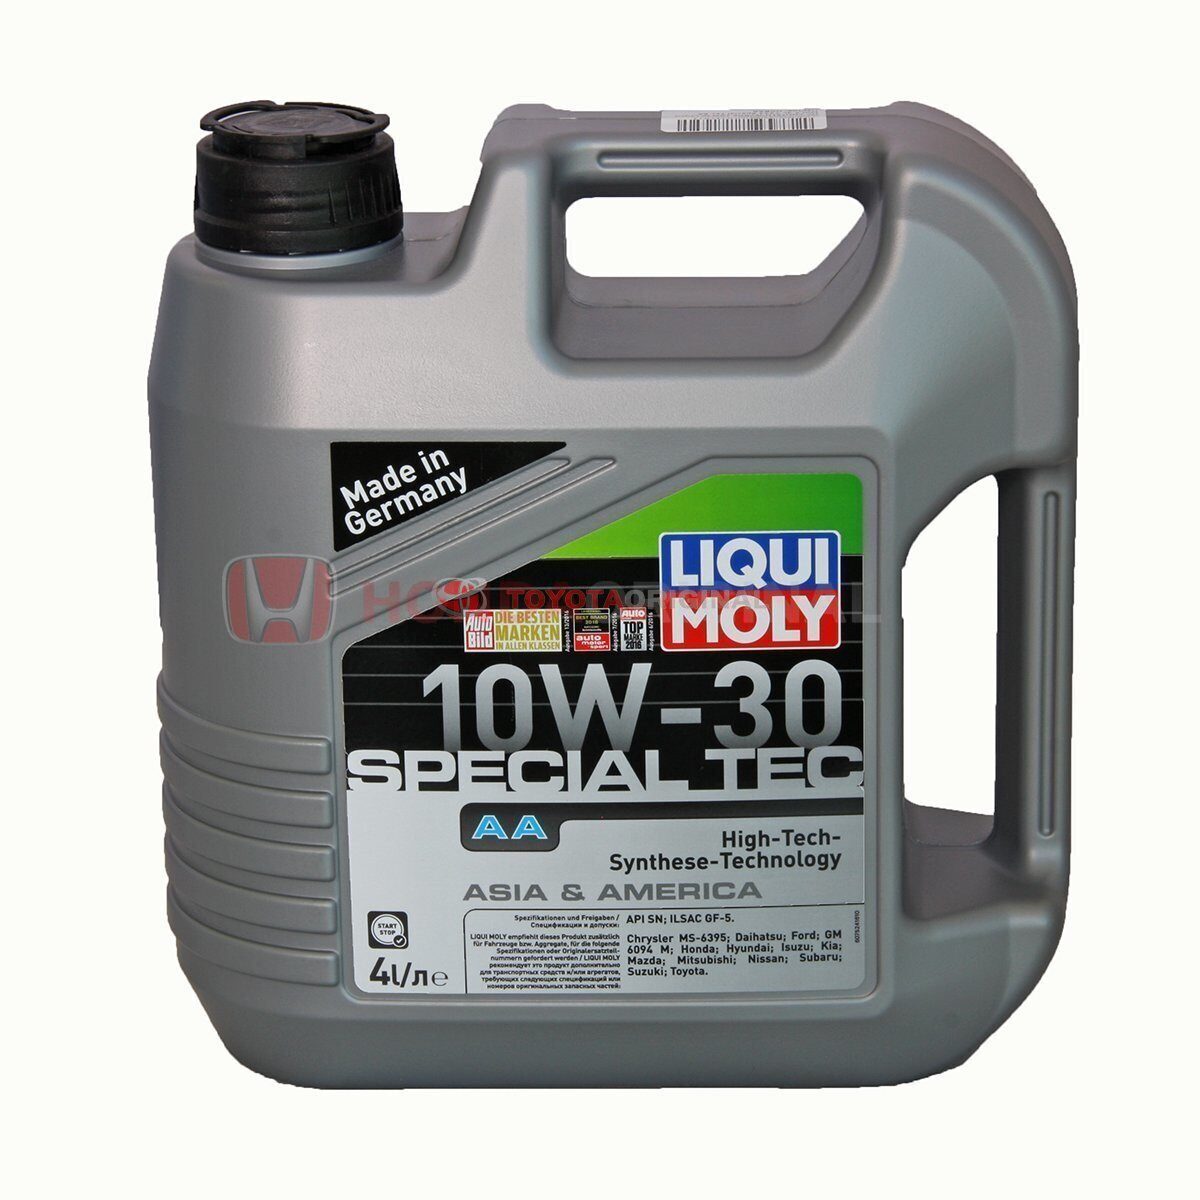 Моторное масло special tec aa 5w 30. 5w-30 SP Special Tec AA 4л (НС-синт.мотор.масло). Liqui Moly Special Tec AA 5w-30. Моторное масло Liqui Moly Special Tec AA 5w-30 4 л. Масло Liqui Moly 10w30 Special Tec.